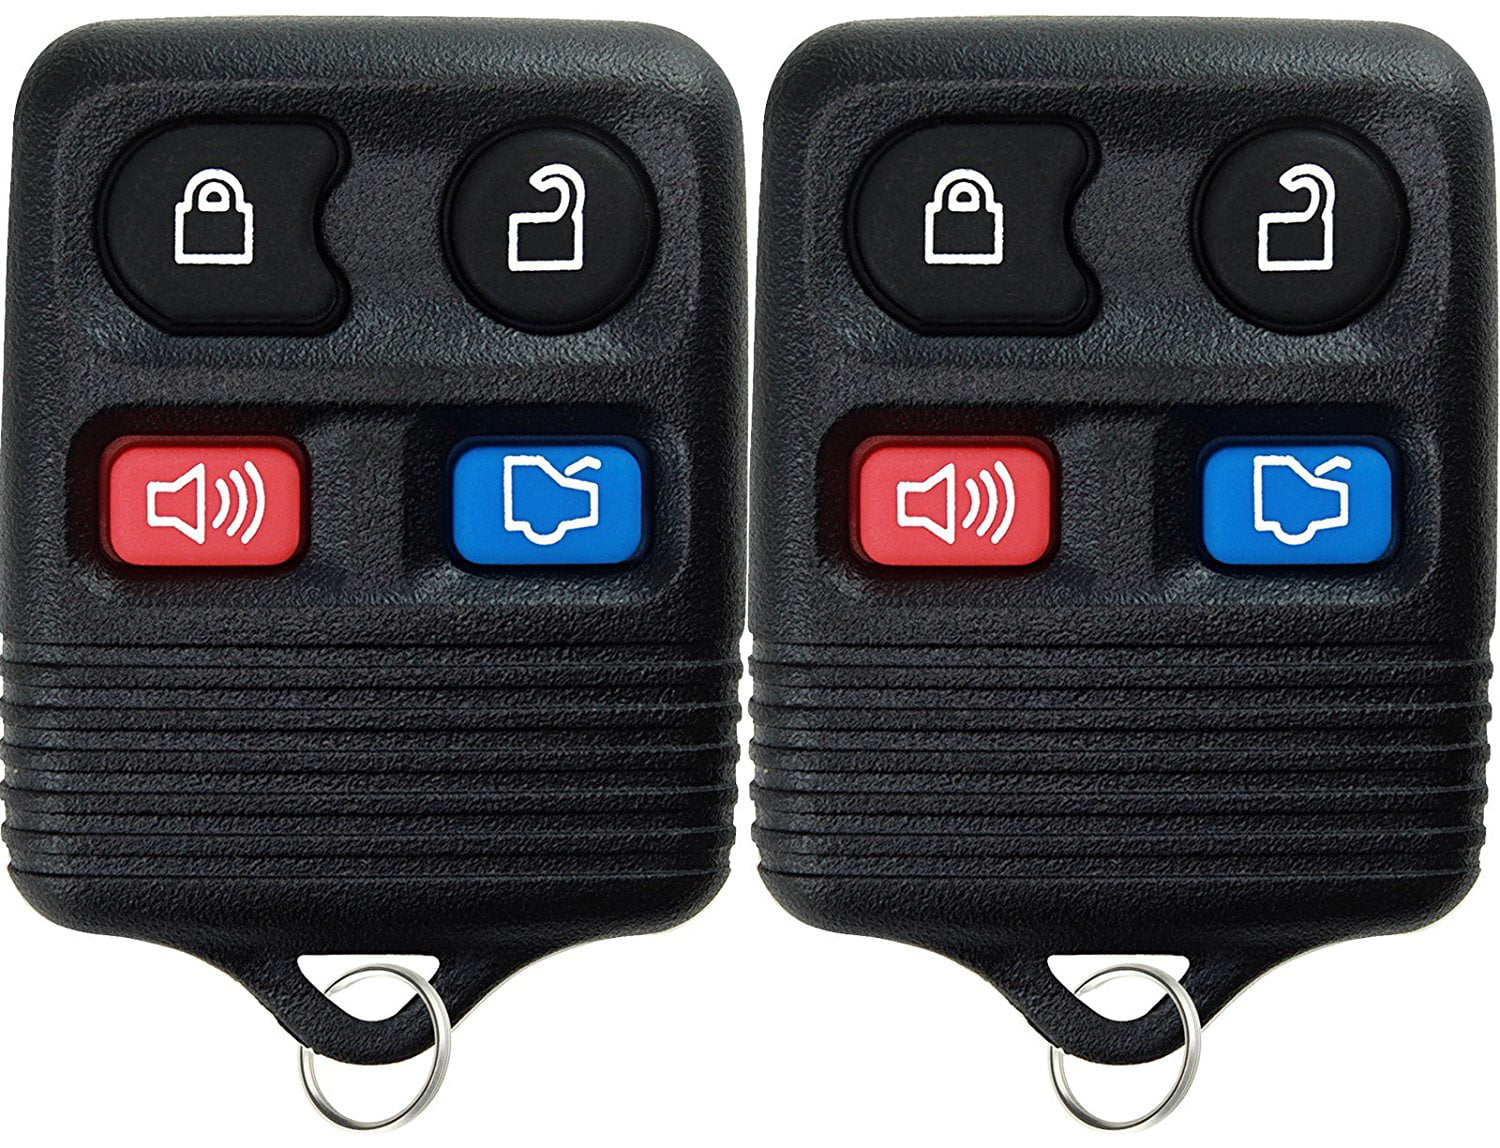 2x Keyless Entry Remote Control Car Key Fob For Ford Taurus Expedition Mustang 